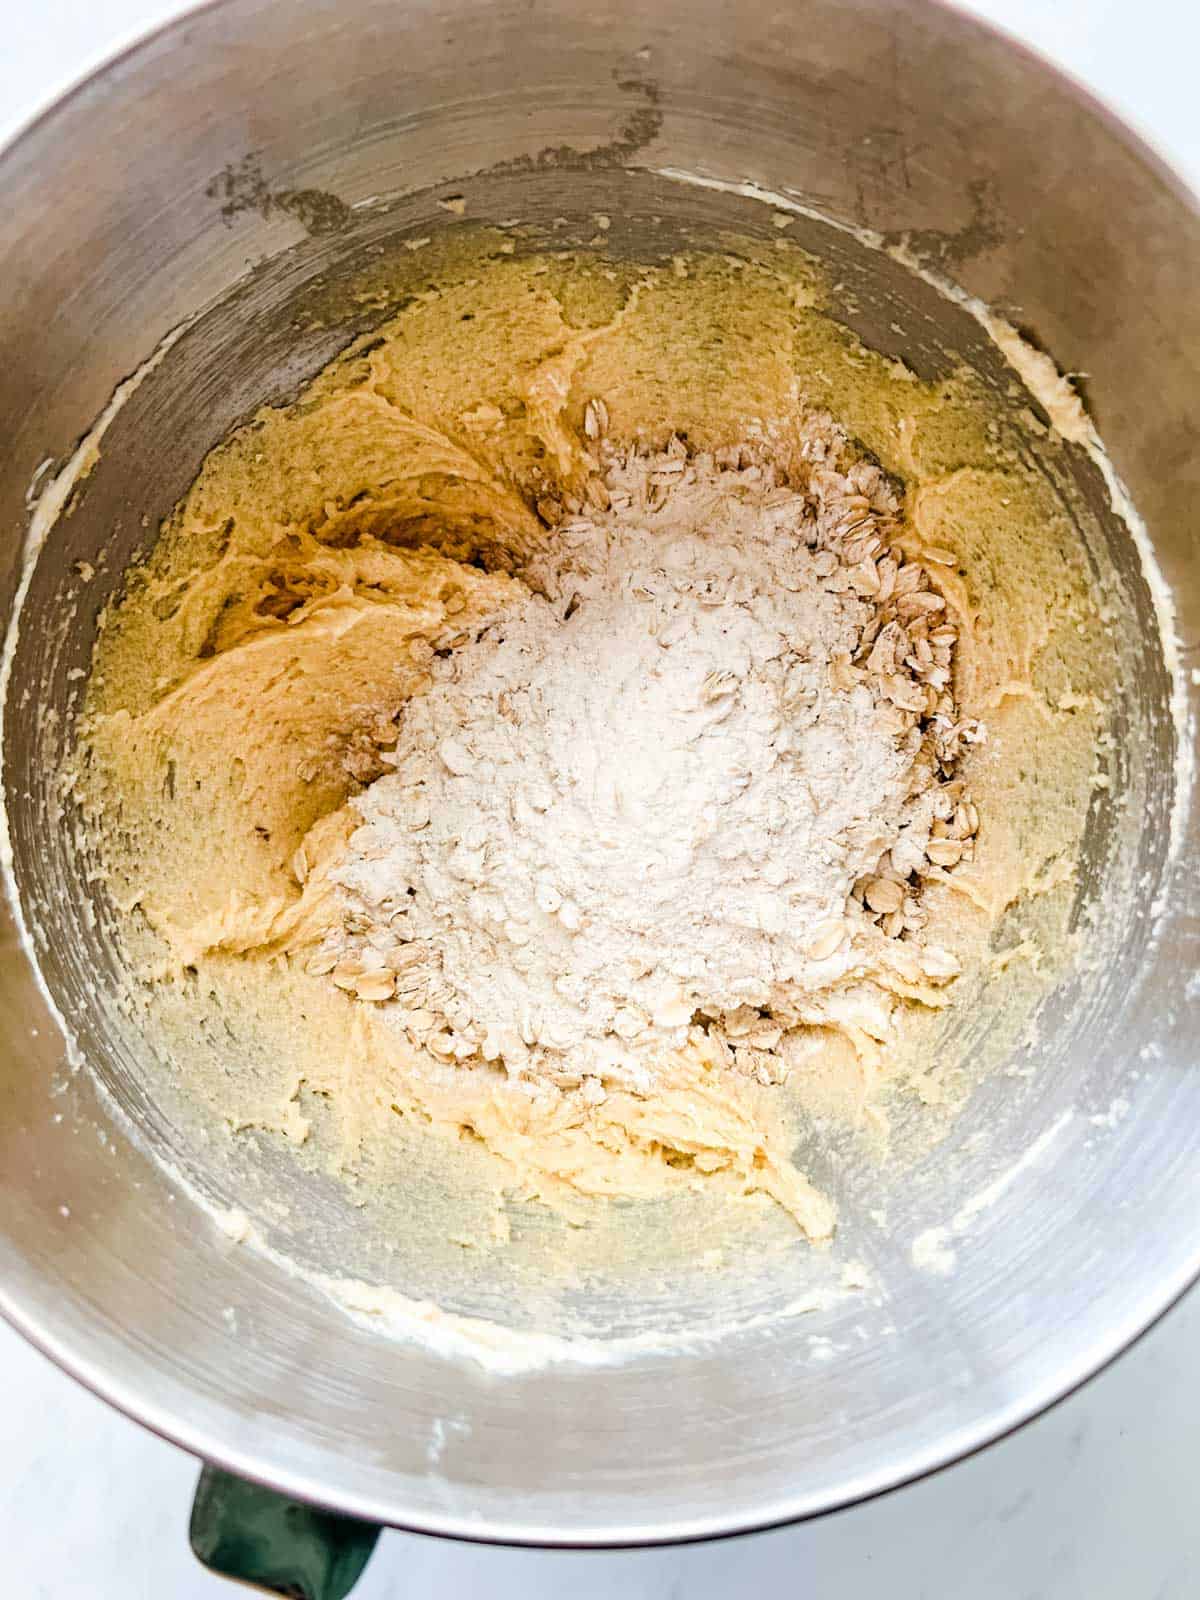 Photo of the creamed butter mixture for cookies that have just had the flour mixture added to them.